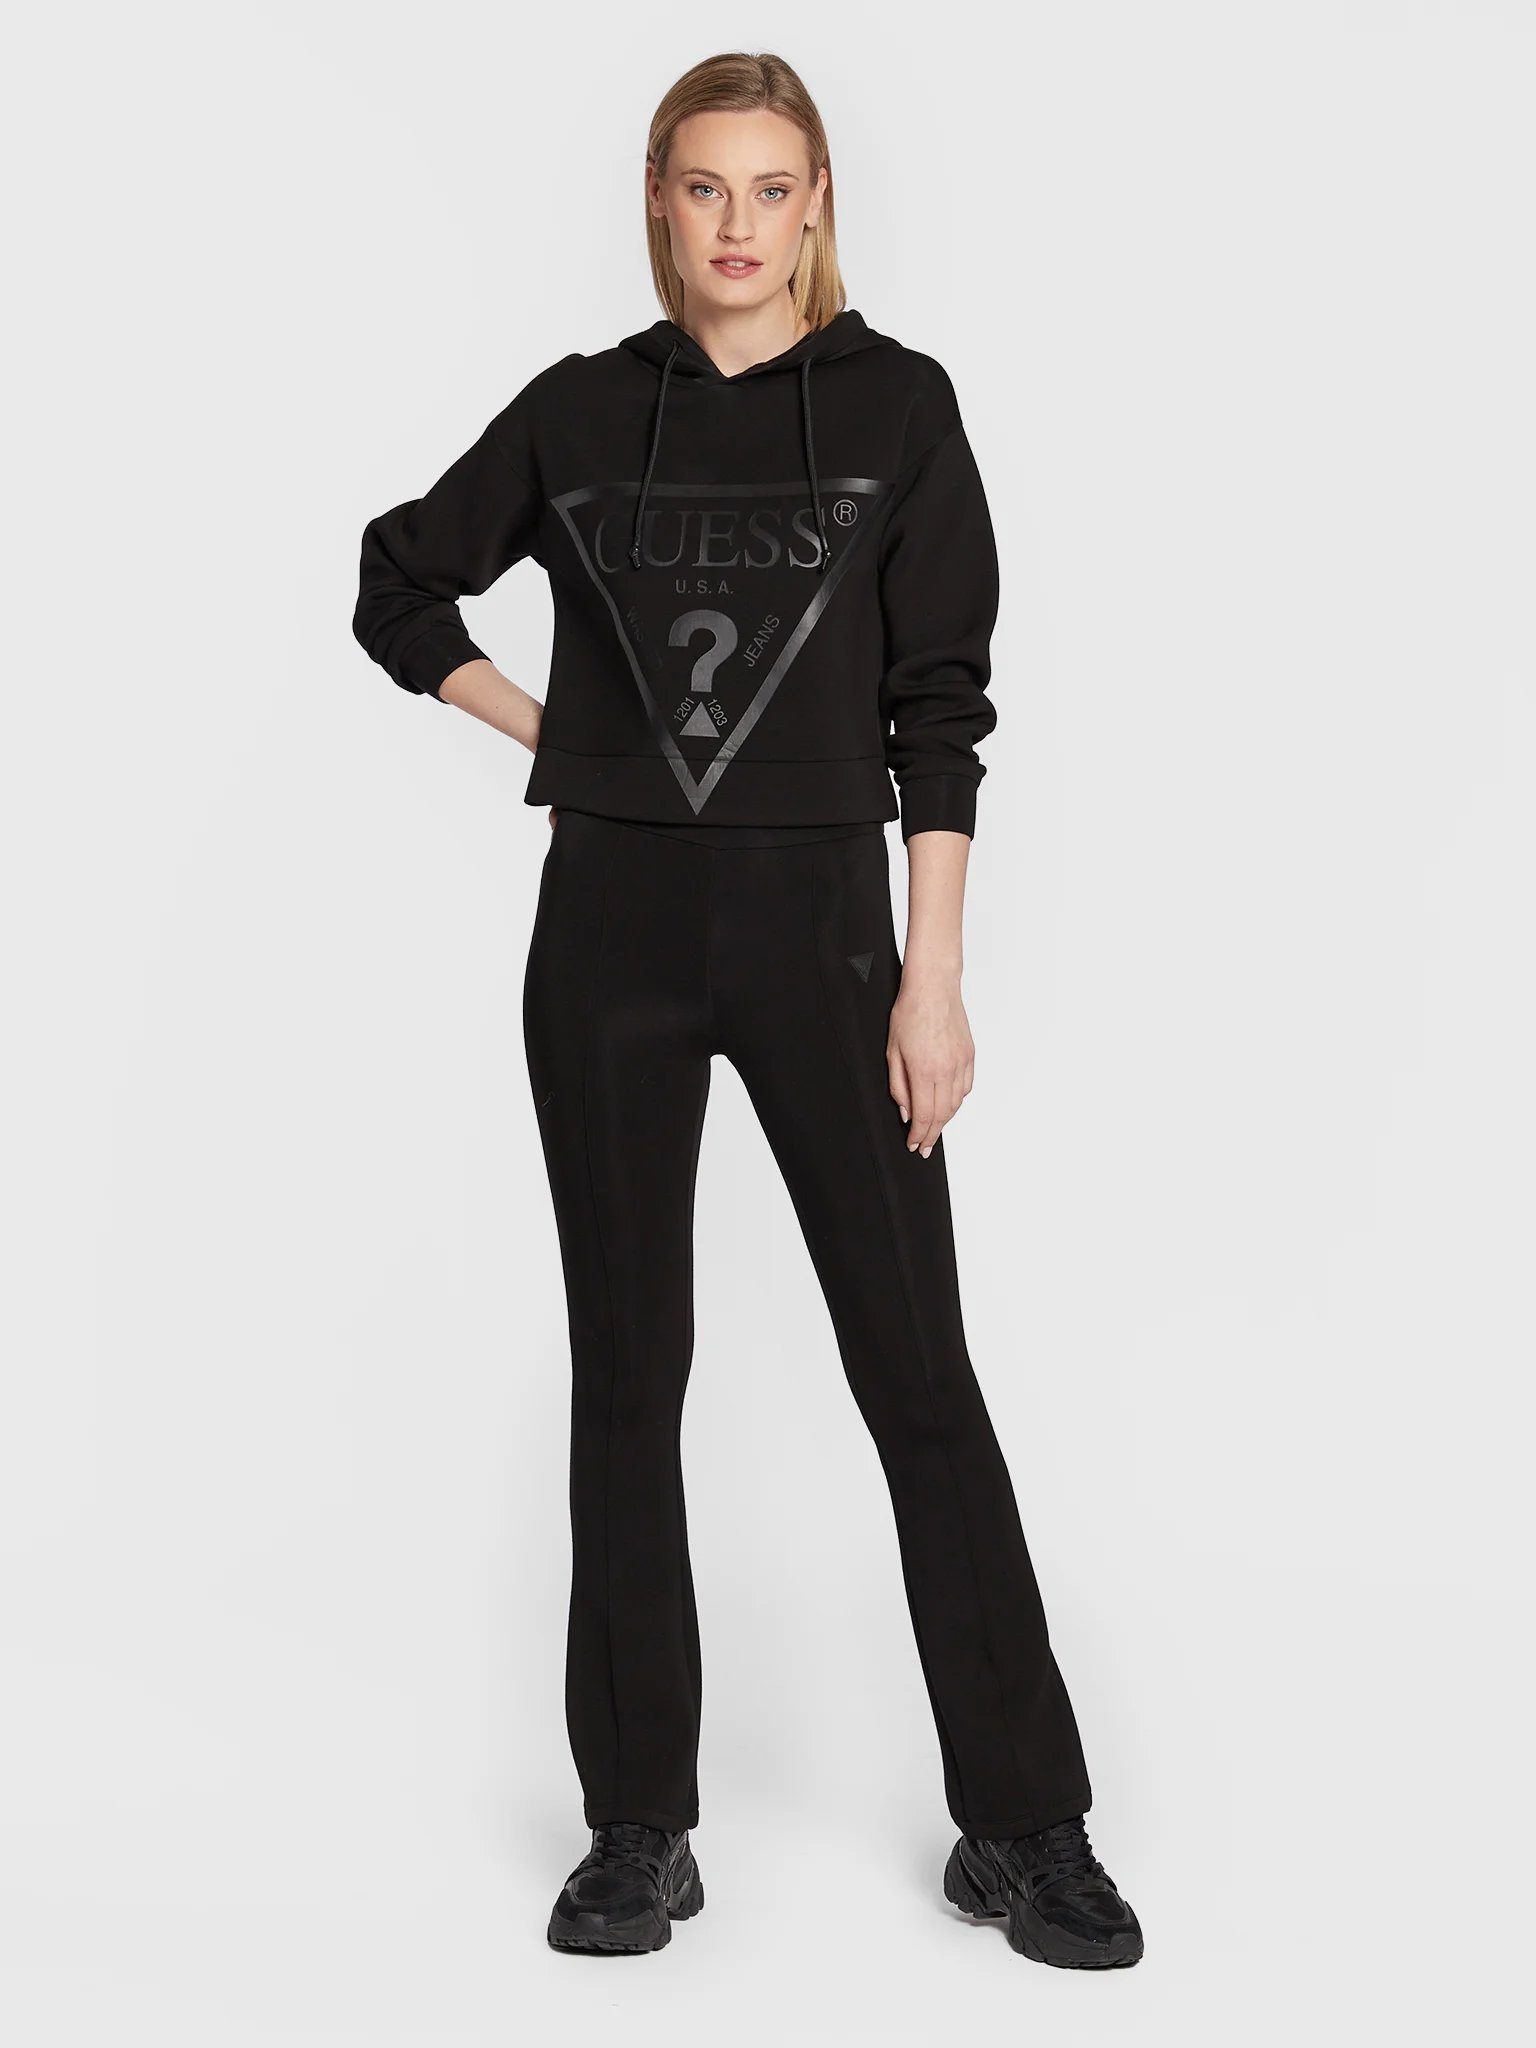 Jet Black Sweatshirt Collection Guess A996